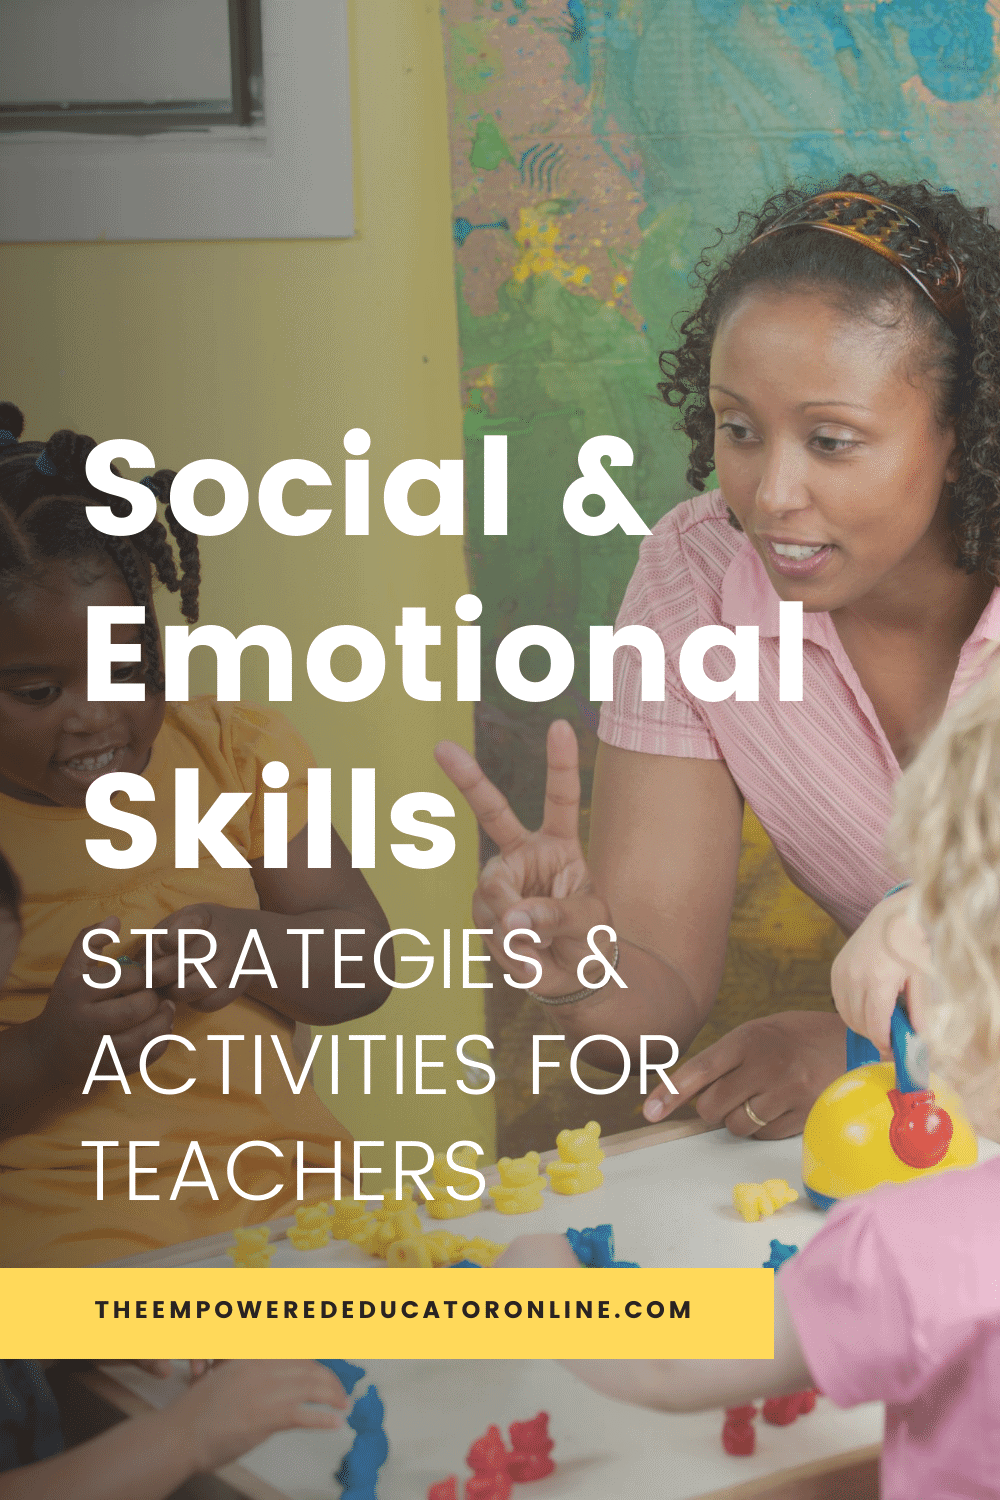 Social & Emotional Skills – Strategies and Activities for Teachers